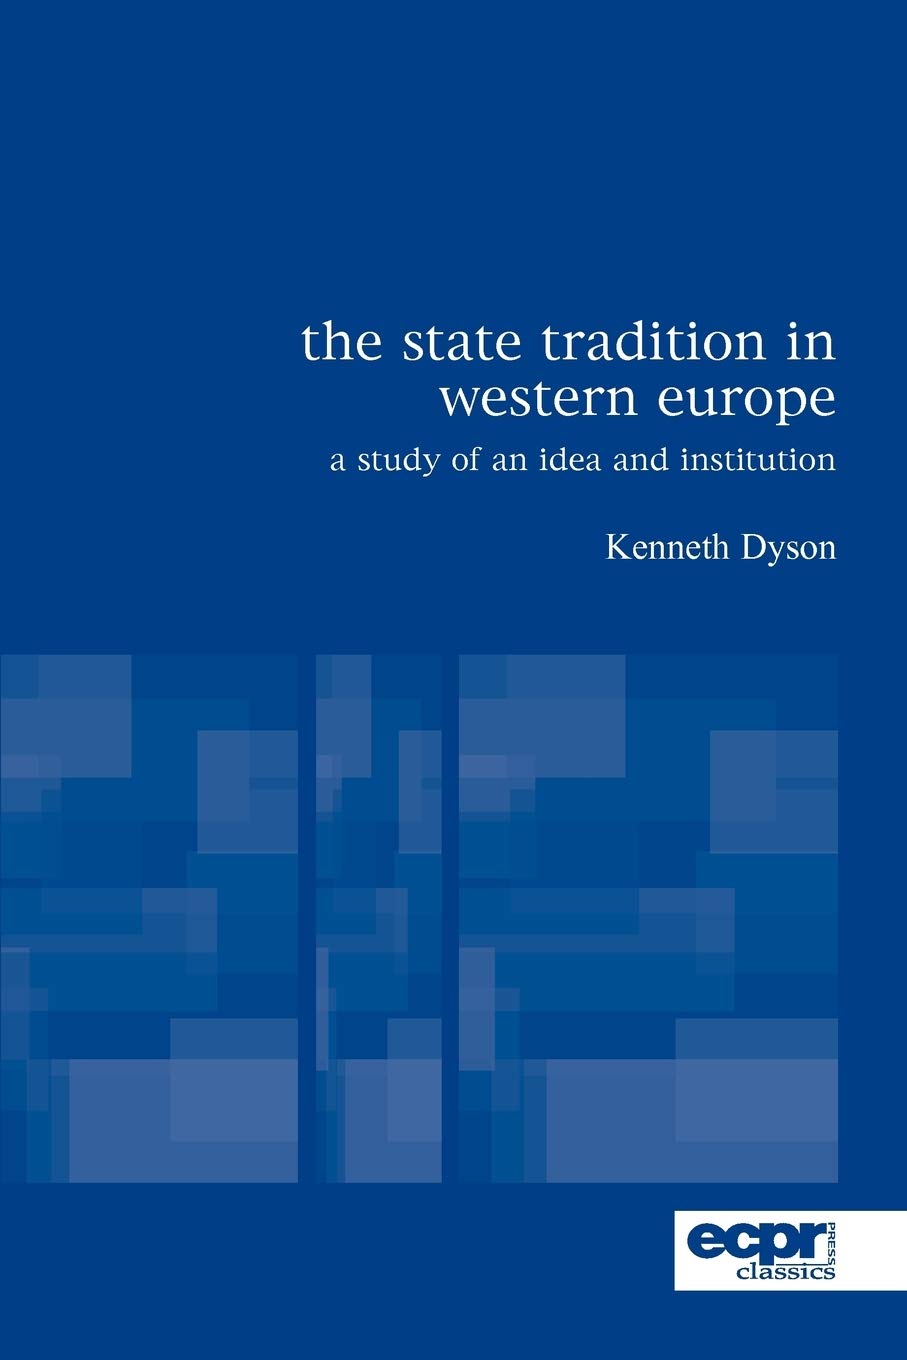 The state tradition in Western Europe magazine reviews